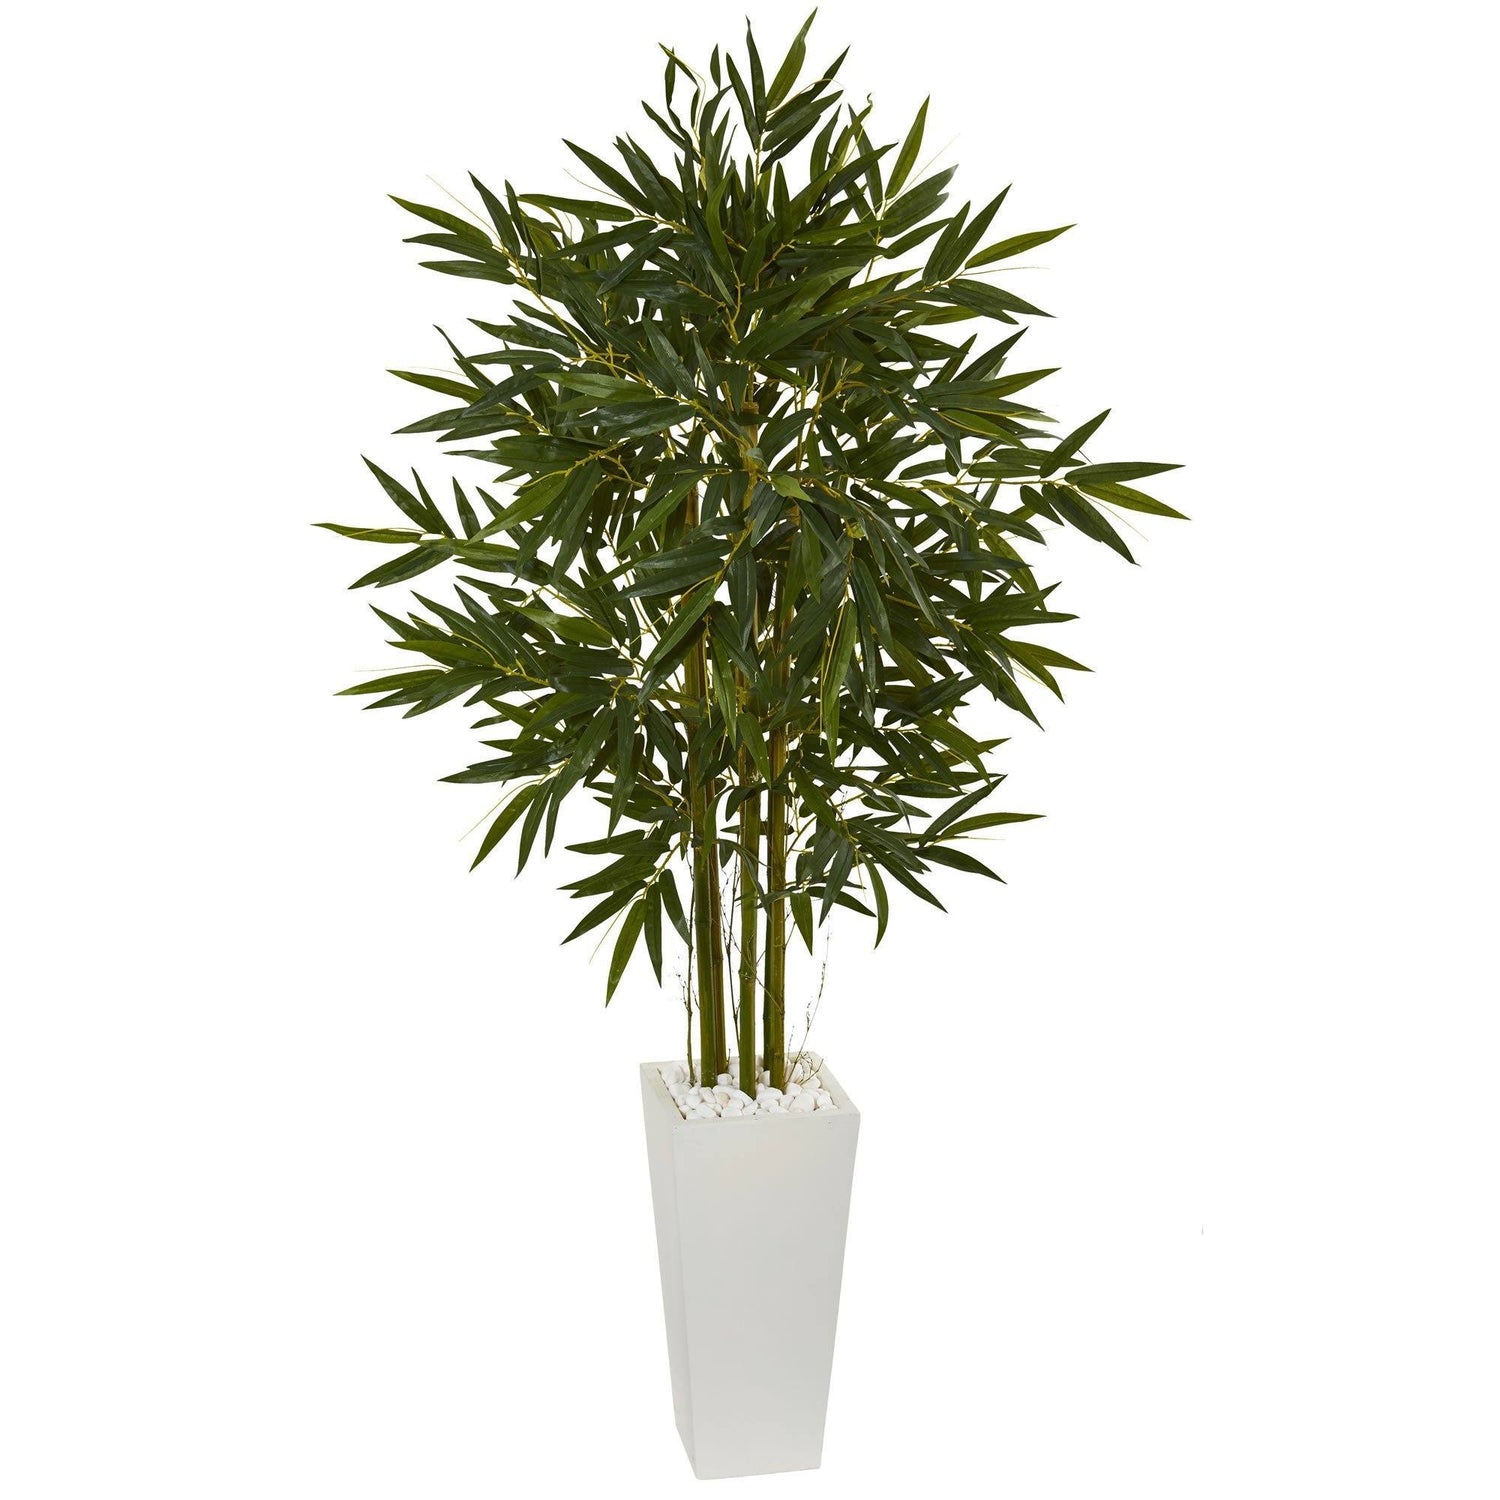 6' Bamboo Artificial Tree in White Tower Planter